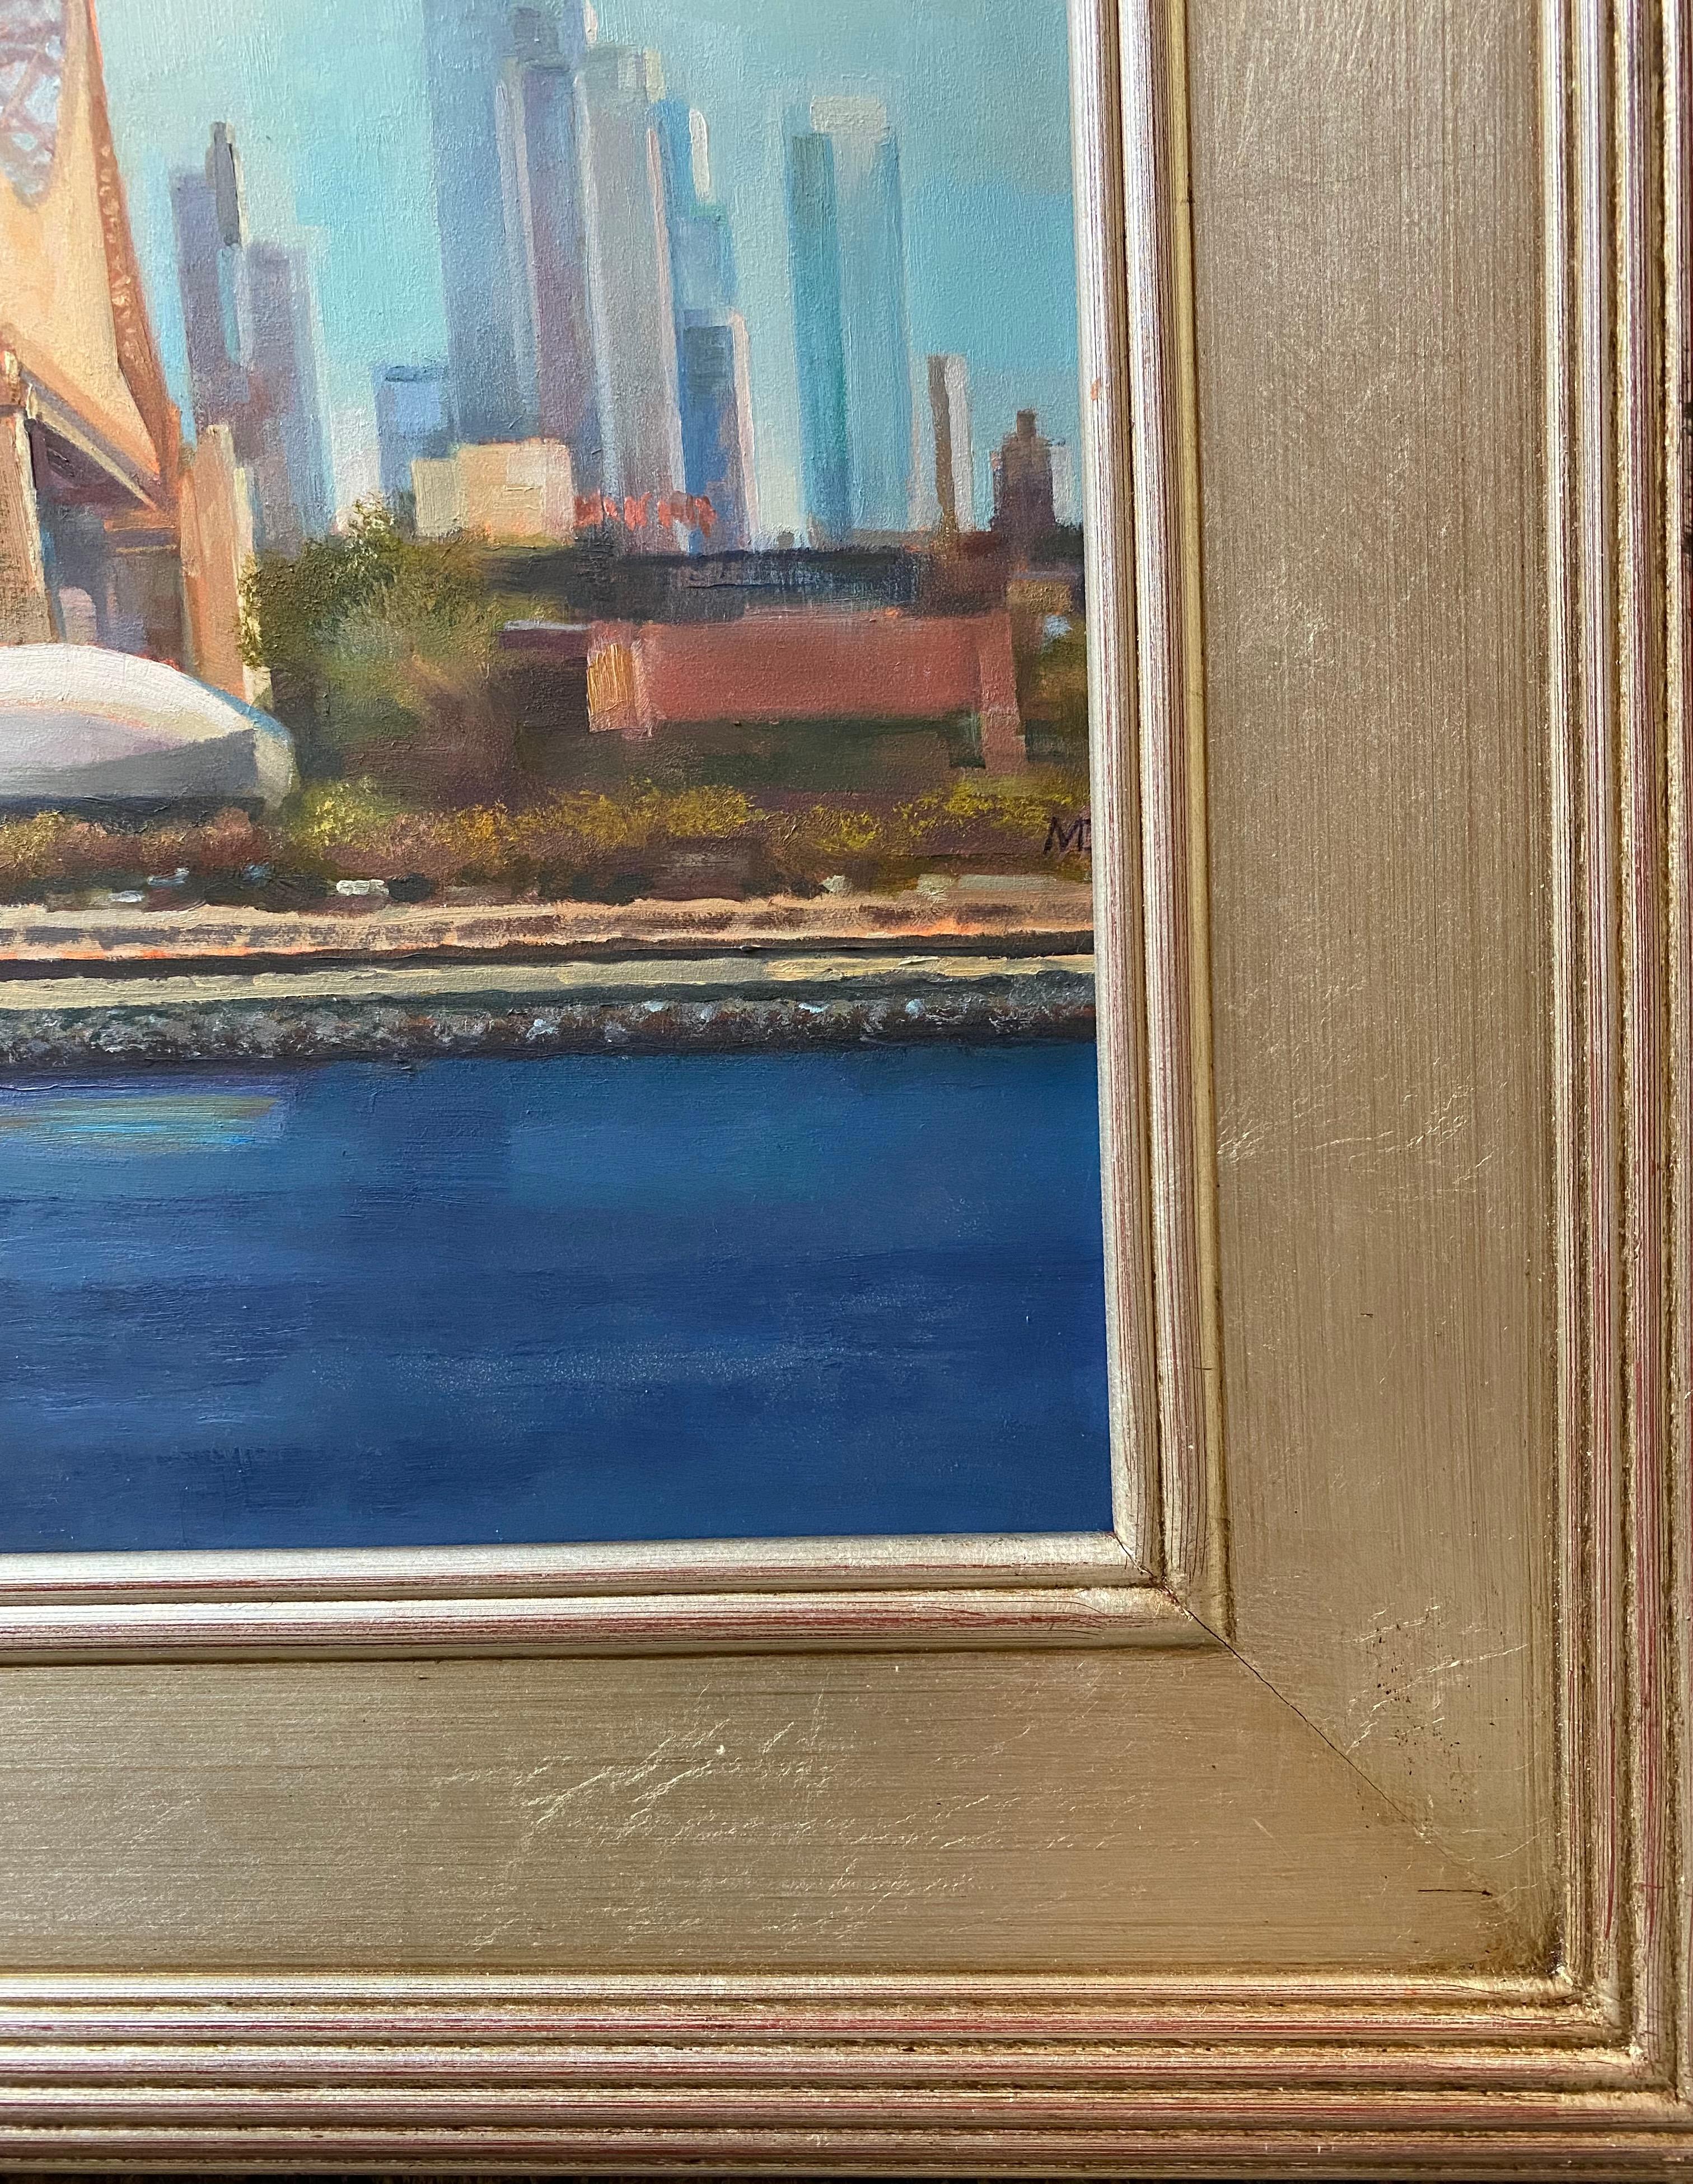 A veritable life line for New York City that connects the boroughs of Manhattan to Queens, NYC artist Michael Davis painted this original landscape in a realist style to ensure capturing the might and splendor that such an architectural and